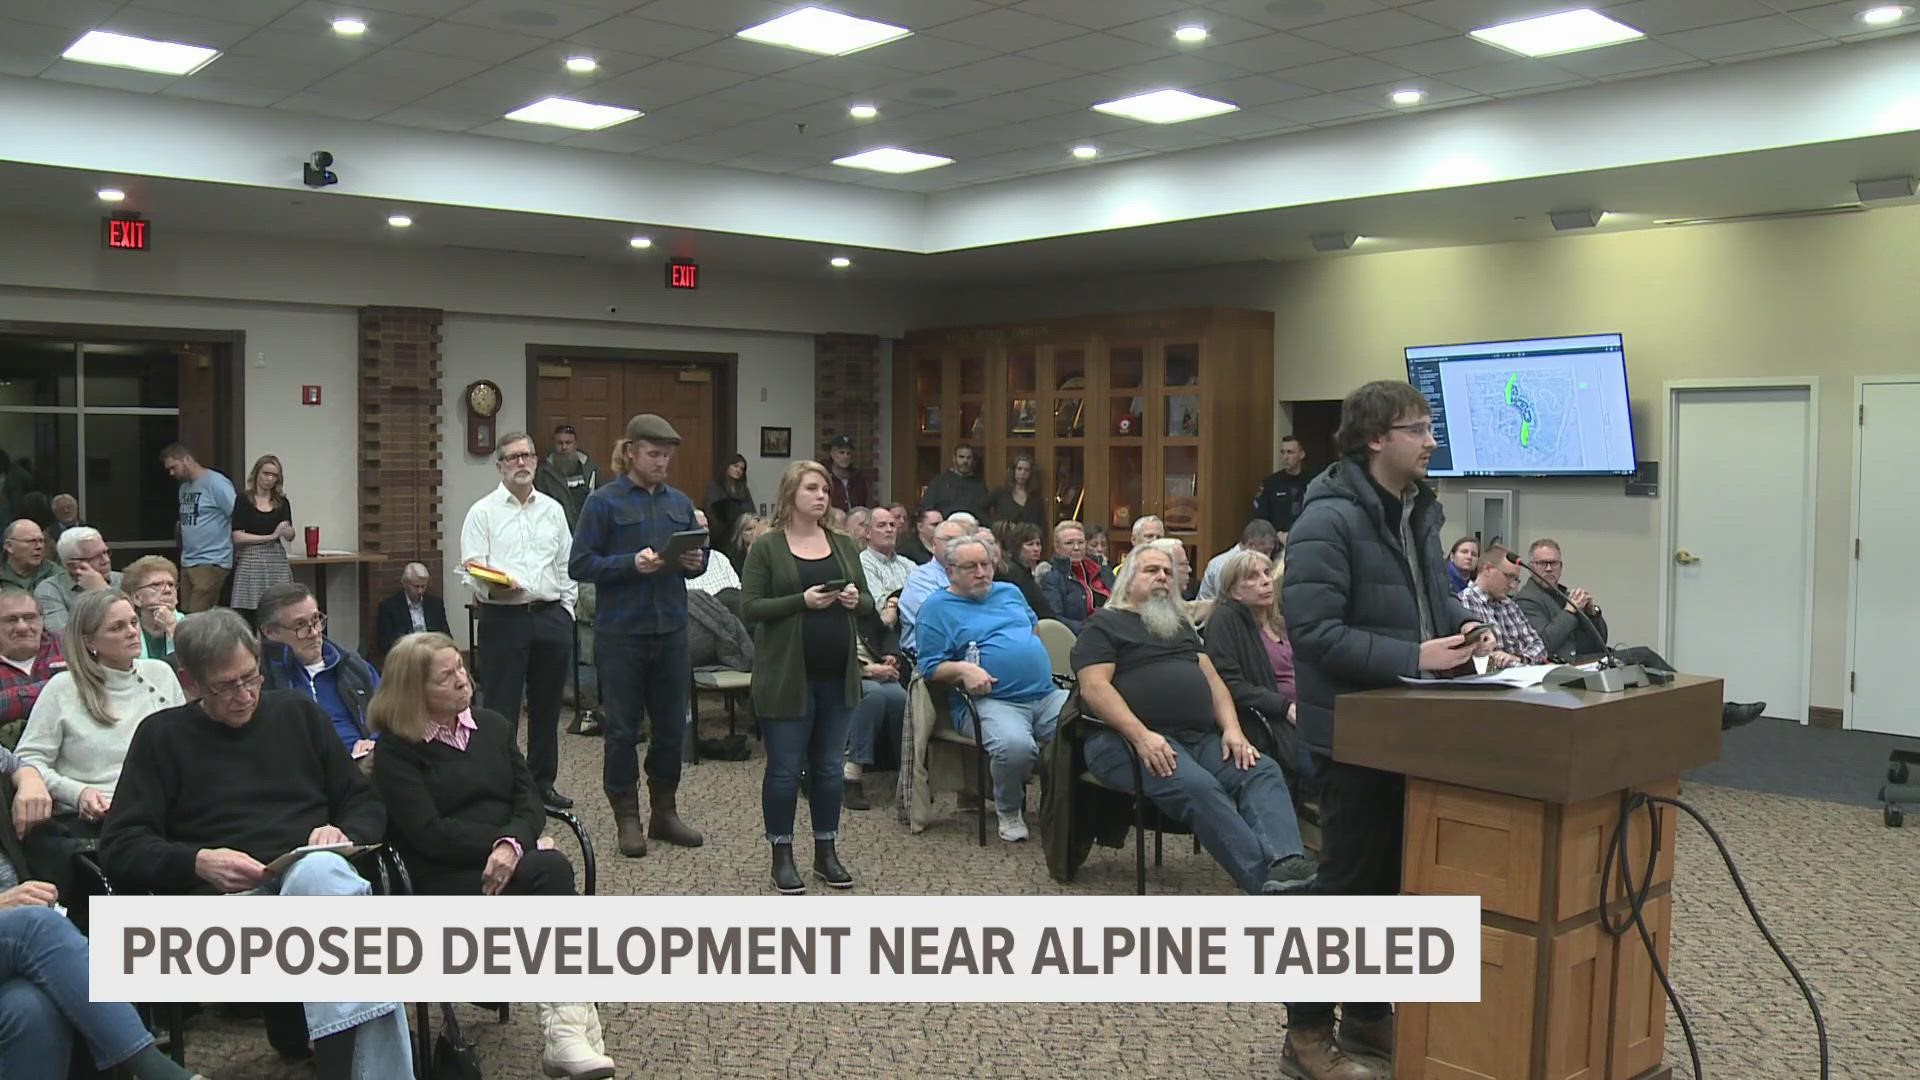 At a public hearing Wednesday night, many people living in the area shared concerns about stormwater, drainage and traffic.